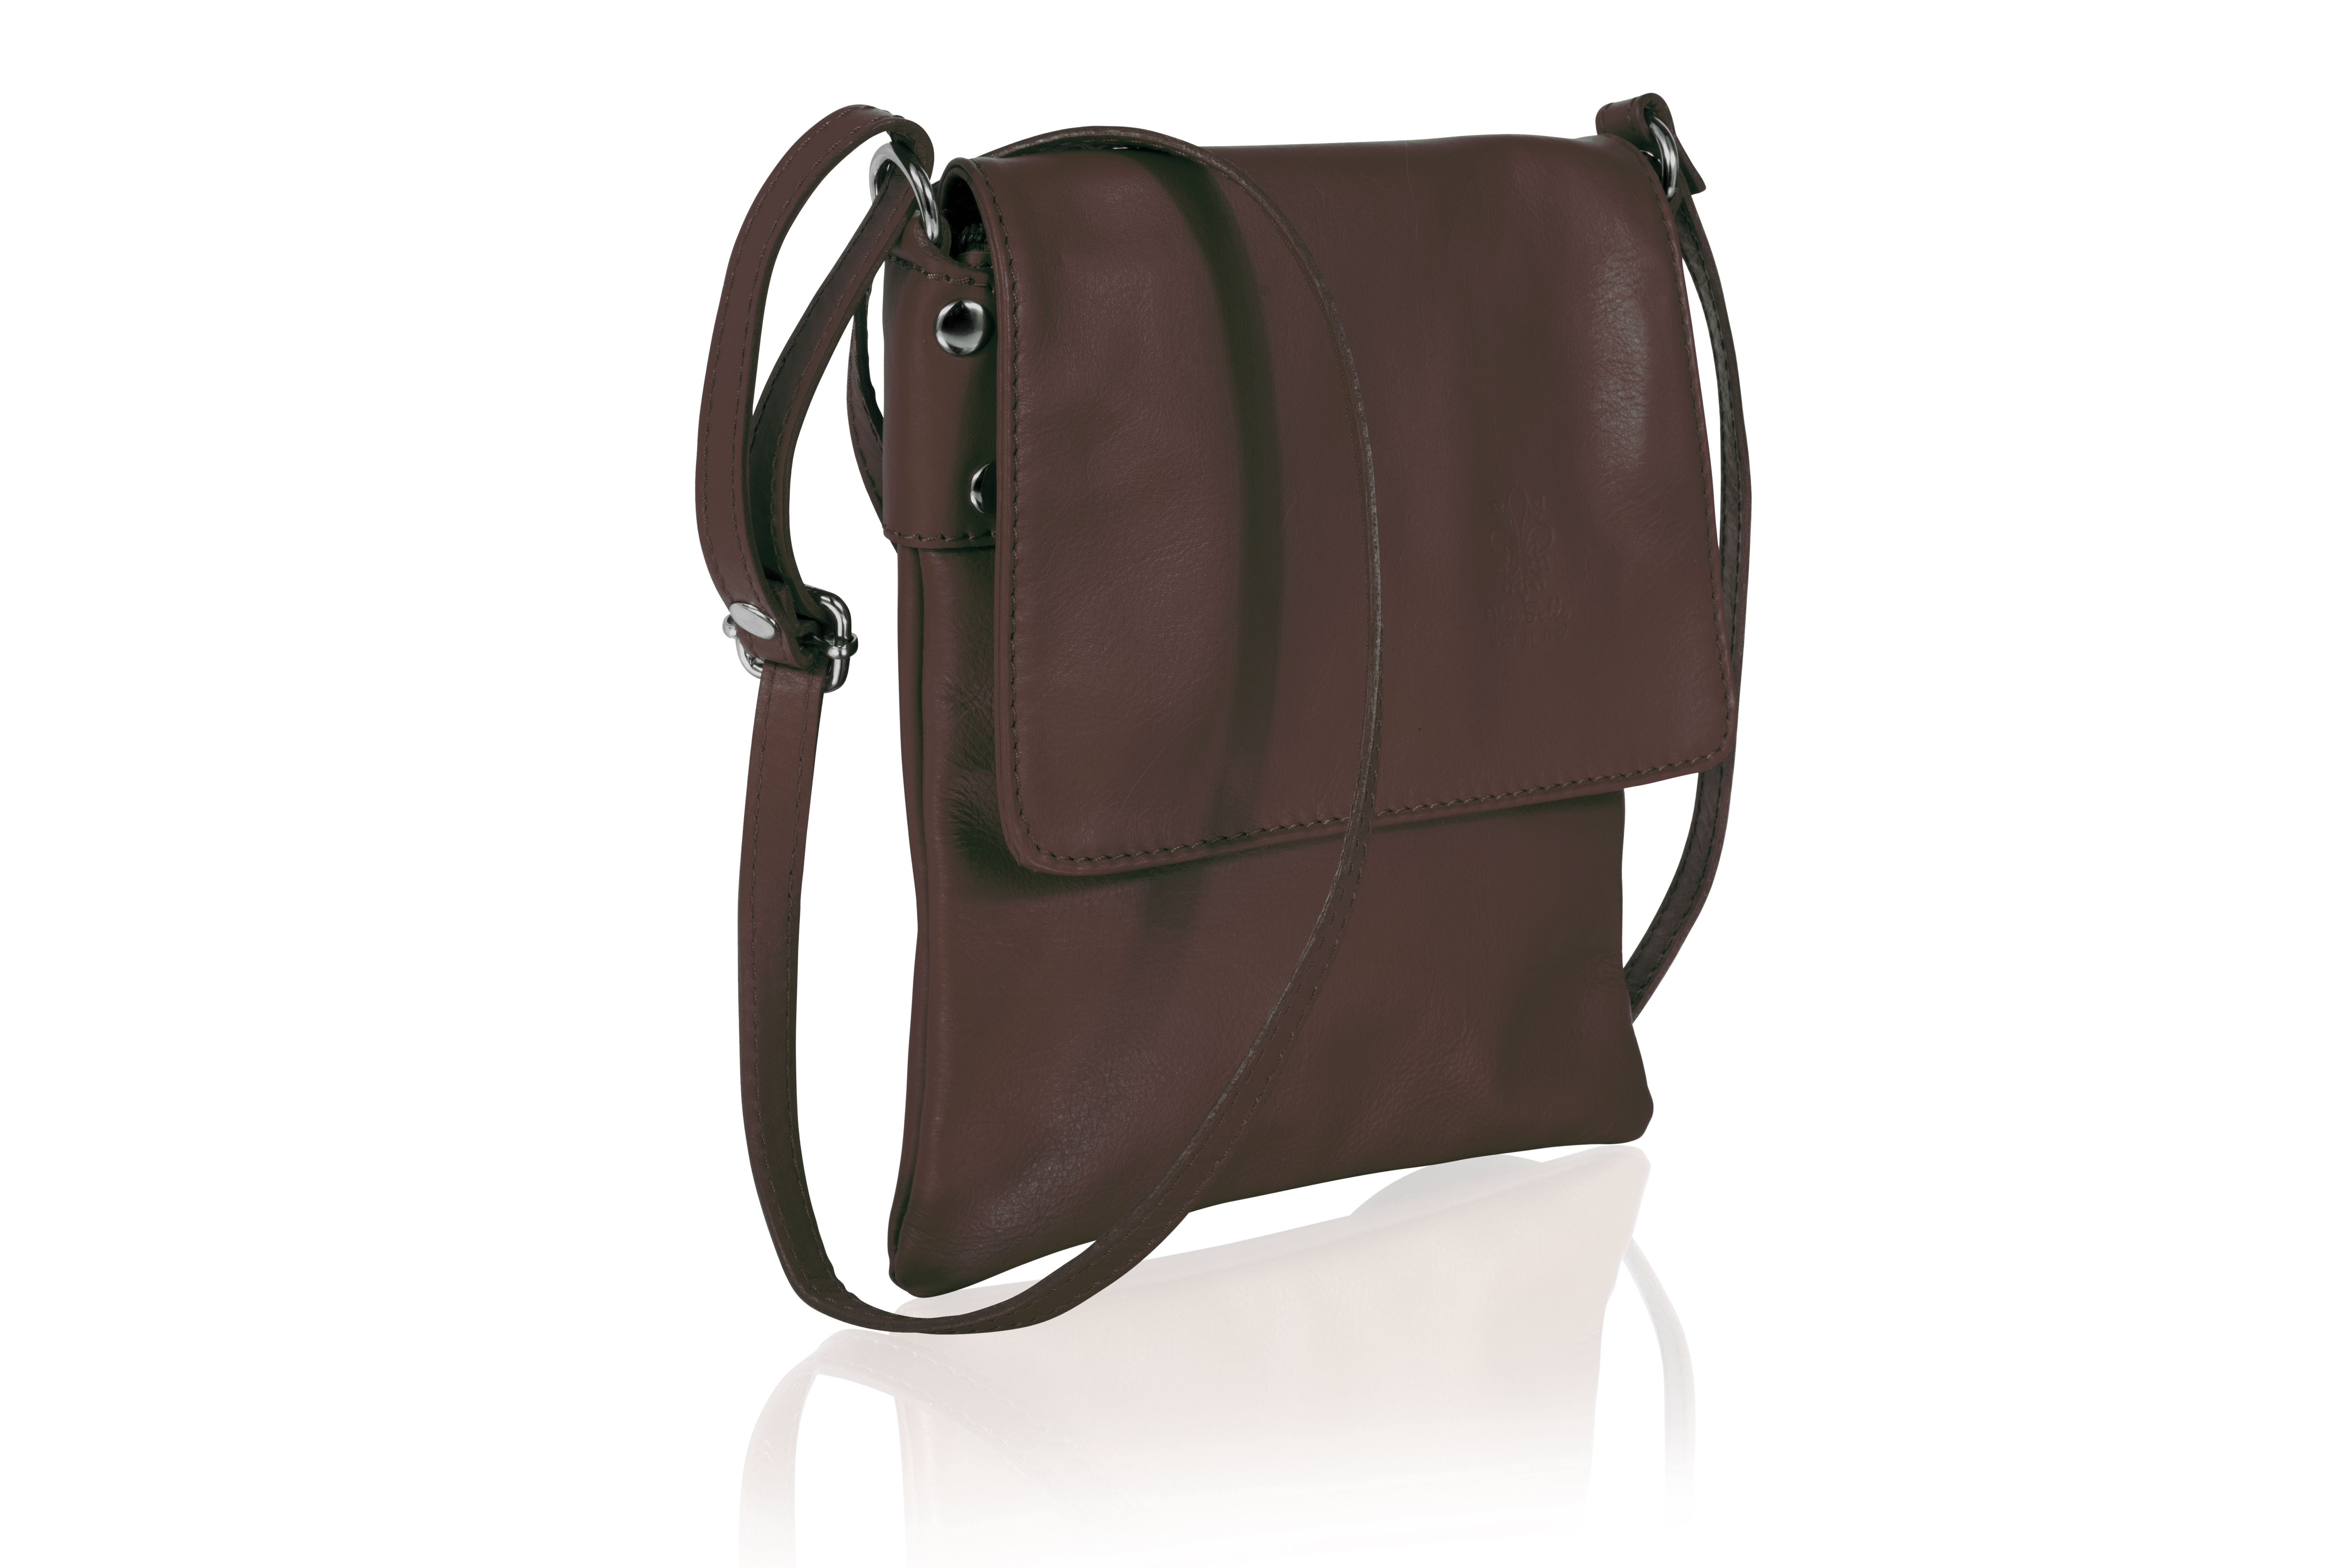 MADE IN ITALY - This messenger bag is made from high quality soft Italian leather.
The main compartment has a full length zip, and inside, there is a zipped pocket in the lining.
On the outside rear of the bag, there is a further zipped compartment.
The strap is fully adjustable by means of a silver coloured sliding buckle.
Dimensions: H21cm x W18cm x D1cm, Due to the bags being handmade, you will find variations in colour, softness, and the grain of the leather, as they are prepared using traditional Florentine techniques.
These variations are characteristics of traditional Italian manufacturing, and are a renowned feature of authentic real leather.
This bags will come with a stamp saying Vera Pelle translated, this means Real or Genuine Leather, and Leather Bag or Handbag.